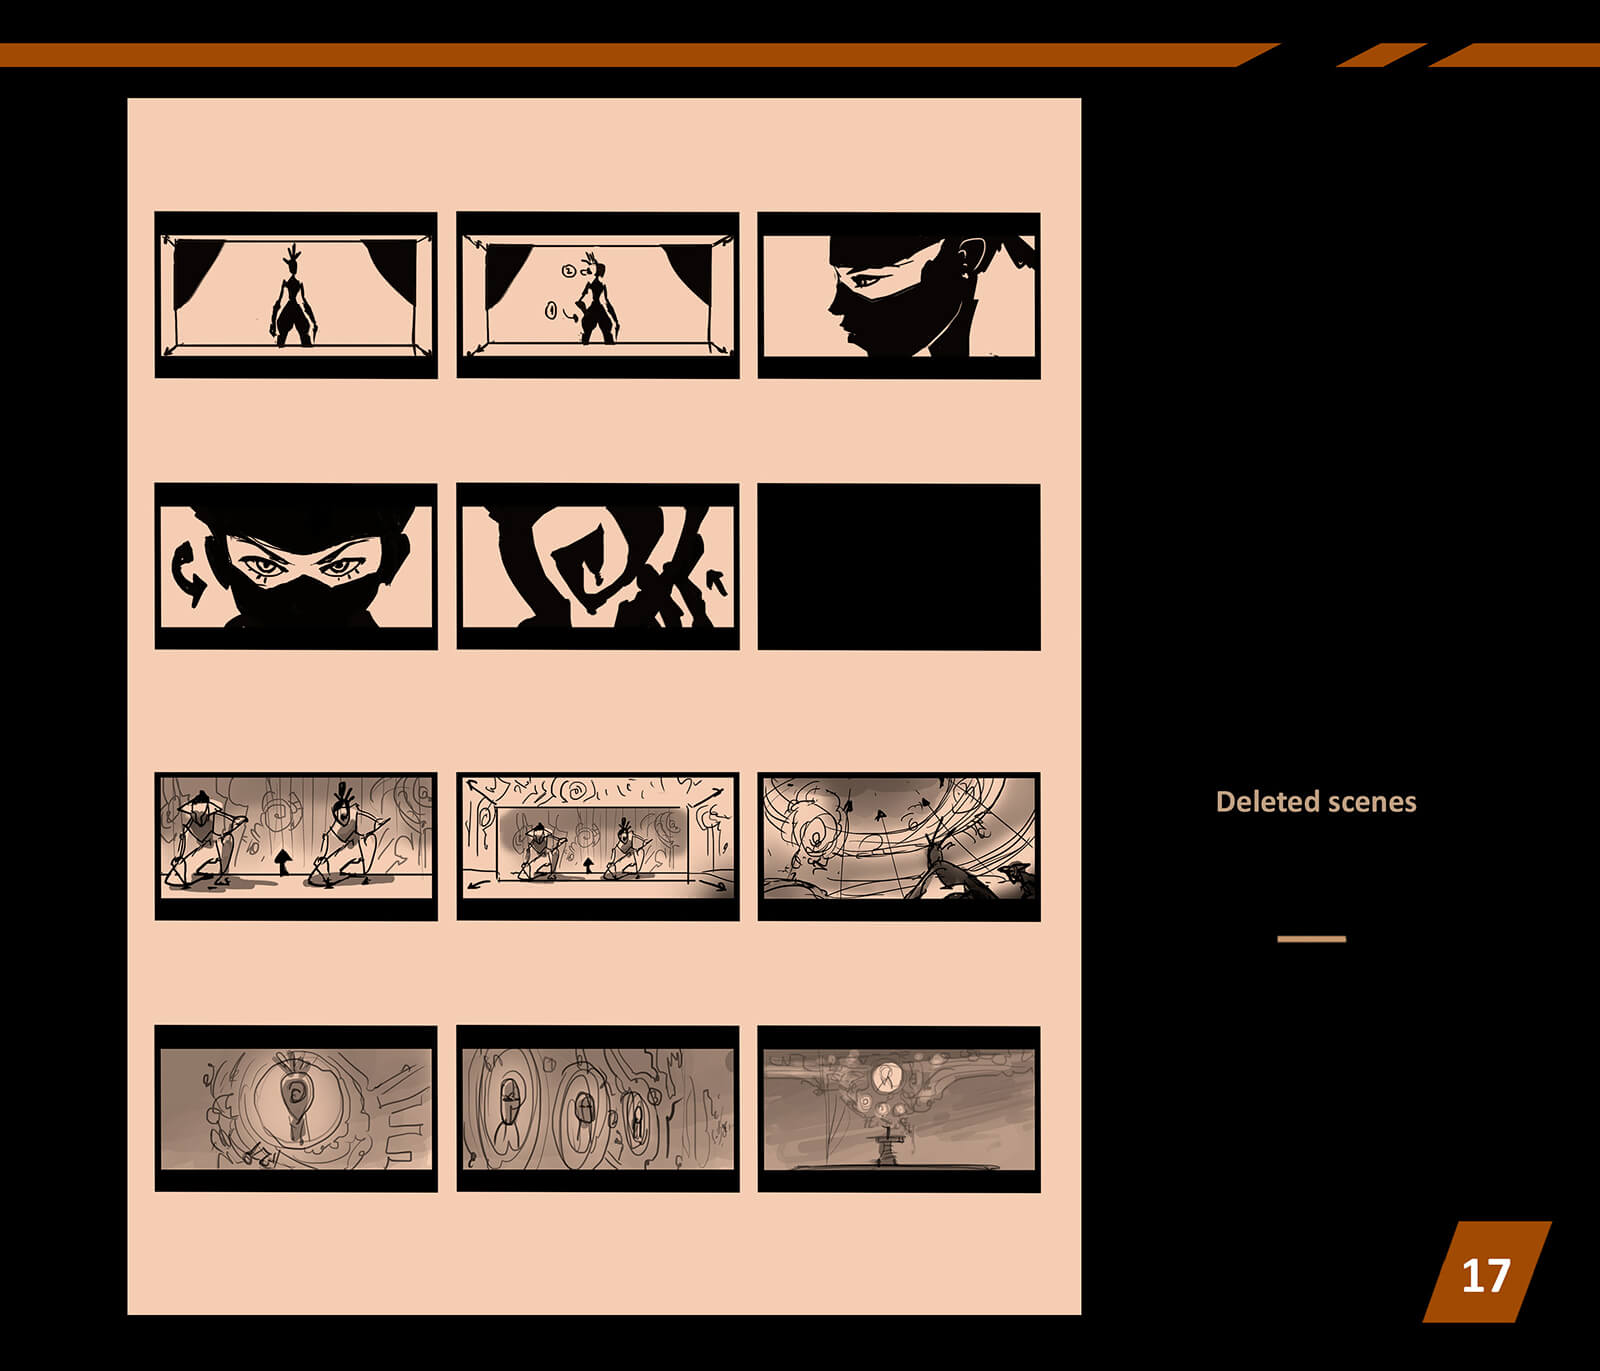 Black-and-white storyboard for the film Three Cold Souls, depicting deleted scenes